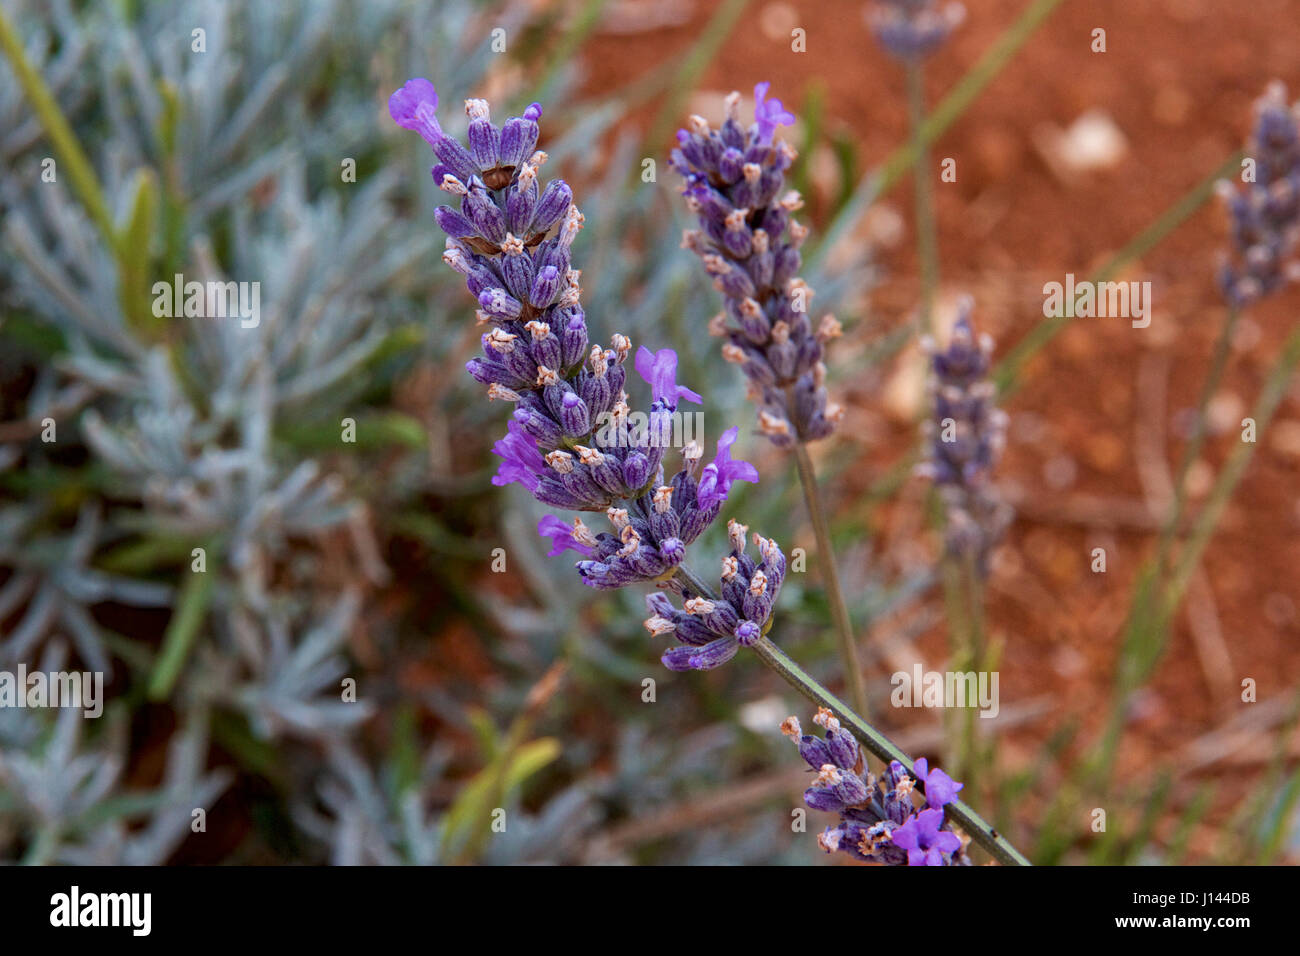 Lavender flowers growing in a garden. Stock Photo